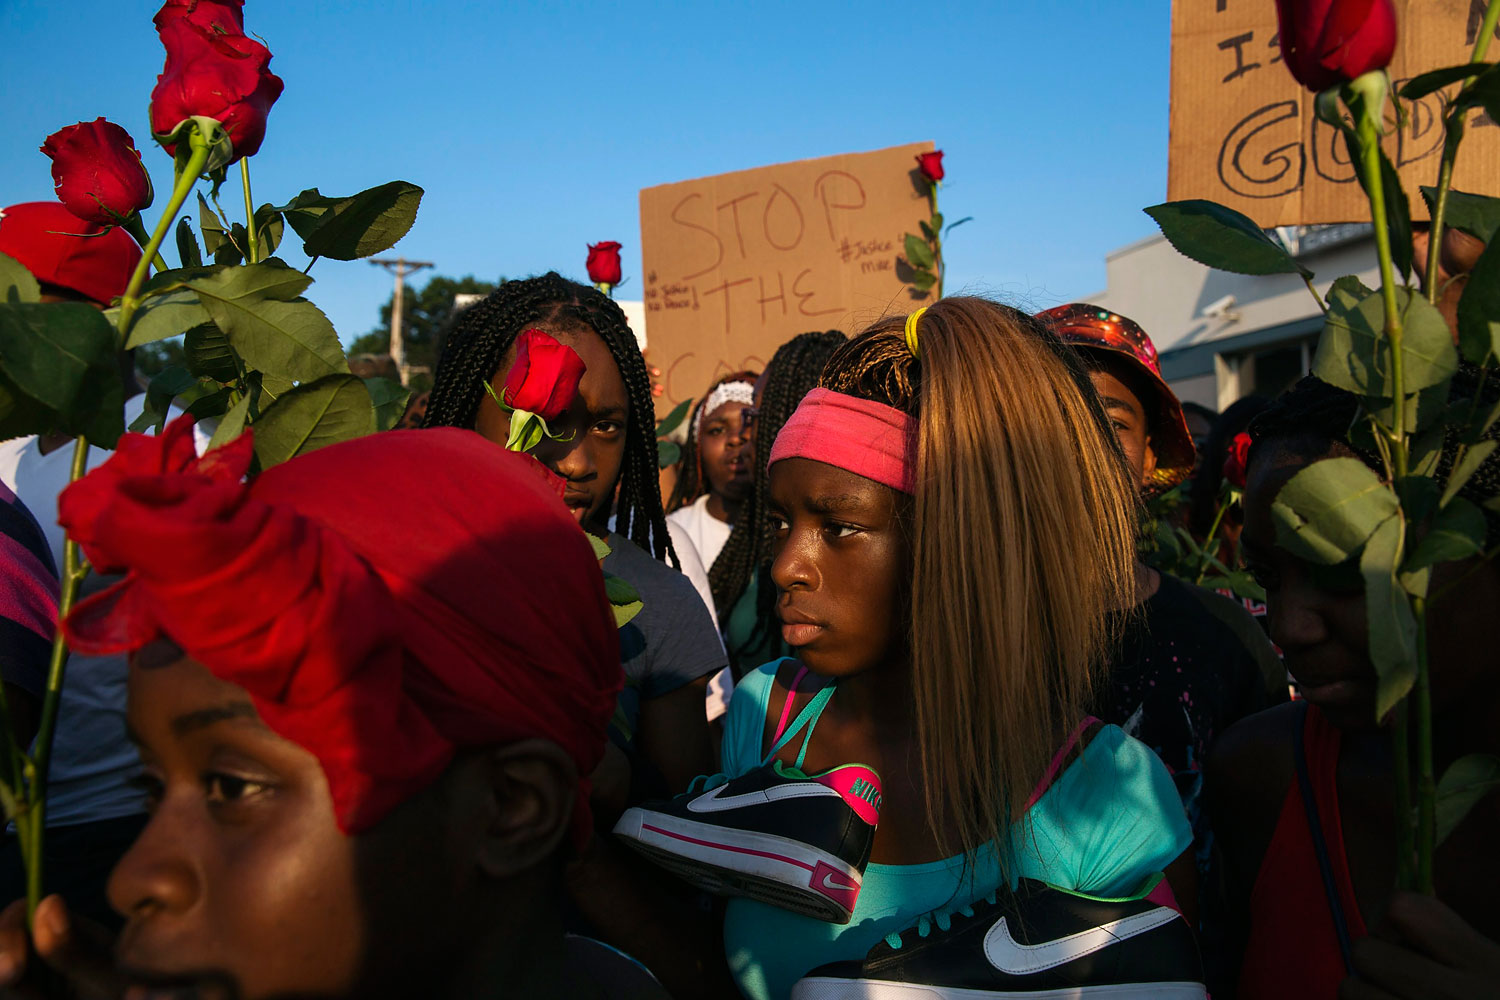 Demonstrators march down West Florissant during a peaceful march in reaction to the shooting of Michael Brown, near Ferguson, Missouri Aug. 18, 2014. (Lucas Jackson—Reuters)